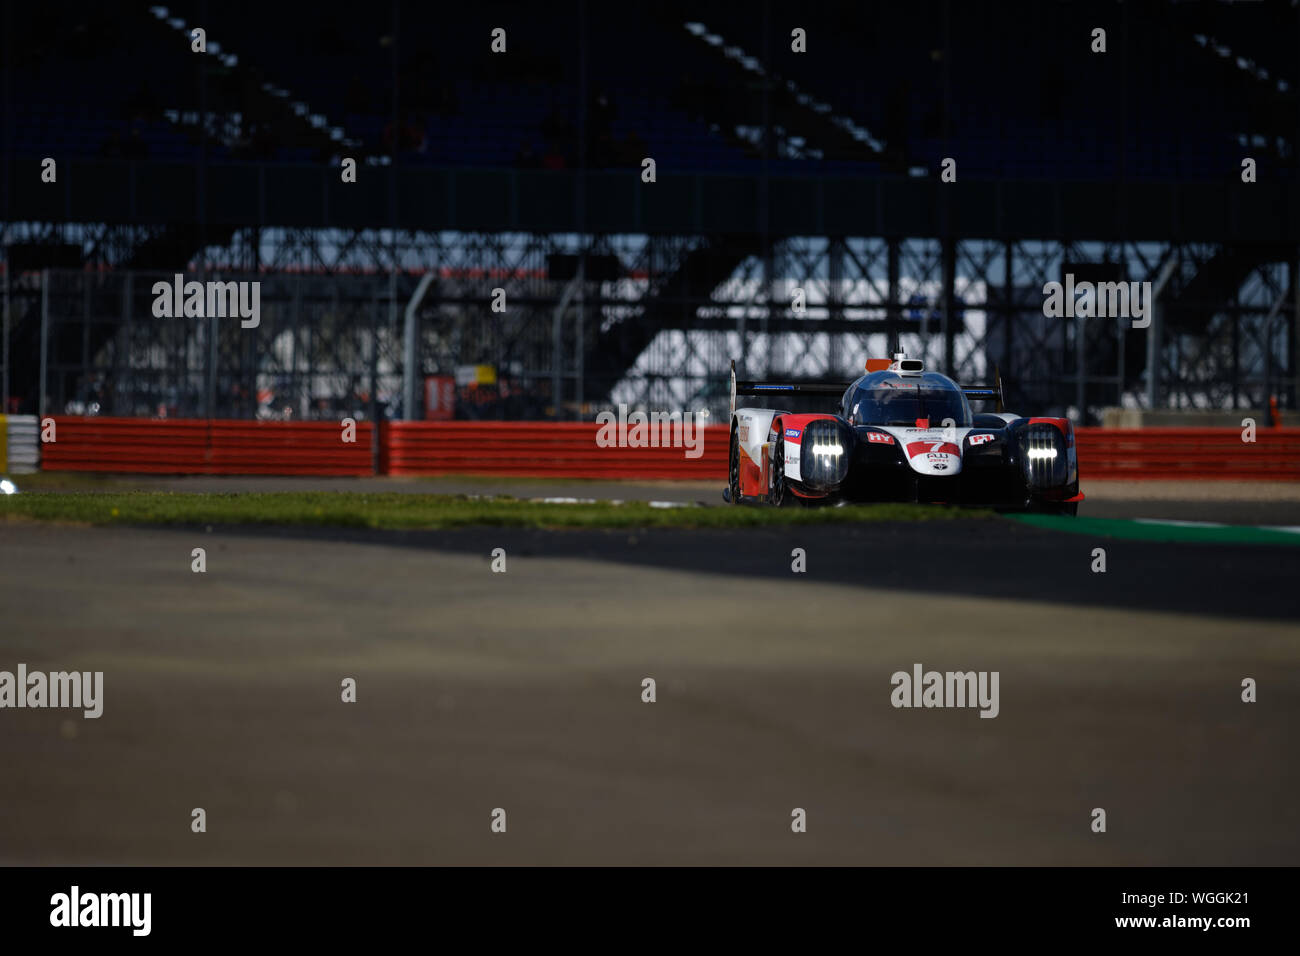 Towcester, Northamptonshire, UK. 1st September 2019. #7 Toyota Gazoo Racing (JPN) Toyota TS050 Hybrid driven by Mike Conway (GBR), Kamui Kobayashi (JPN), Jose Maria Lopez (ARG) during the 2019 FIA 4 Hours of Silverstone World Endurance Championship at Silverstone Circuit. Photo by Gergo Toth / Alamy Live News Stock Photo